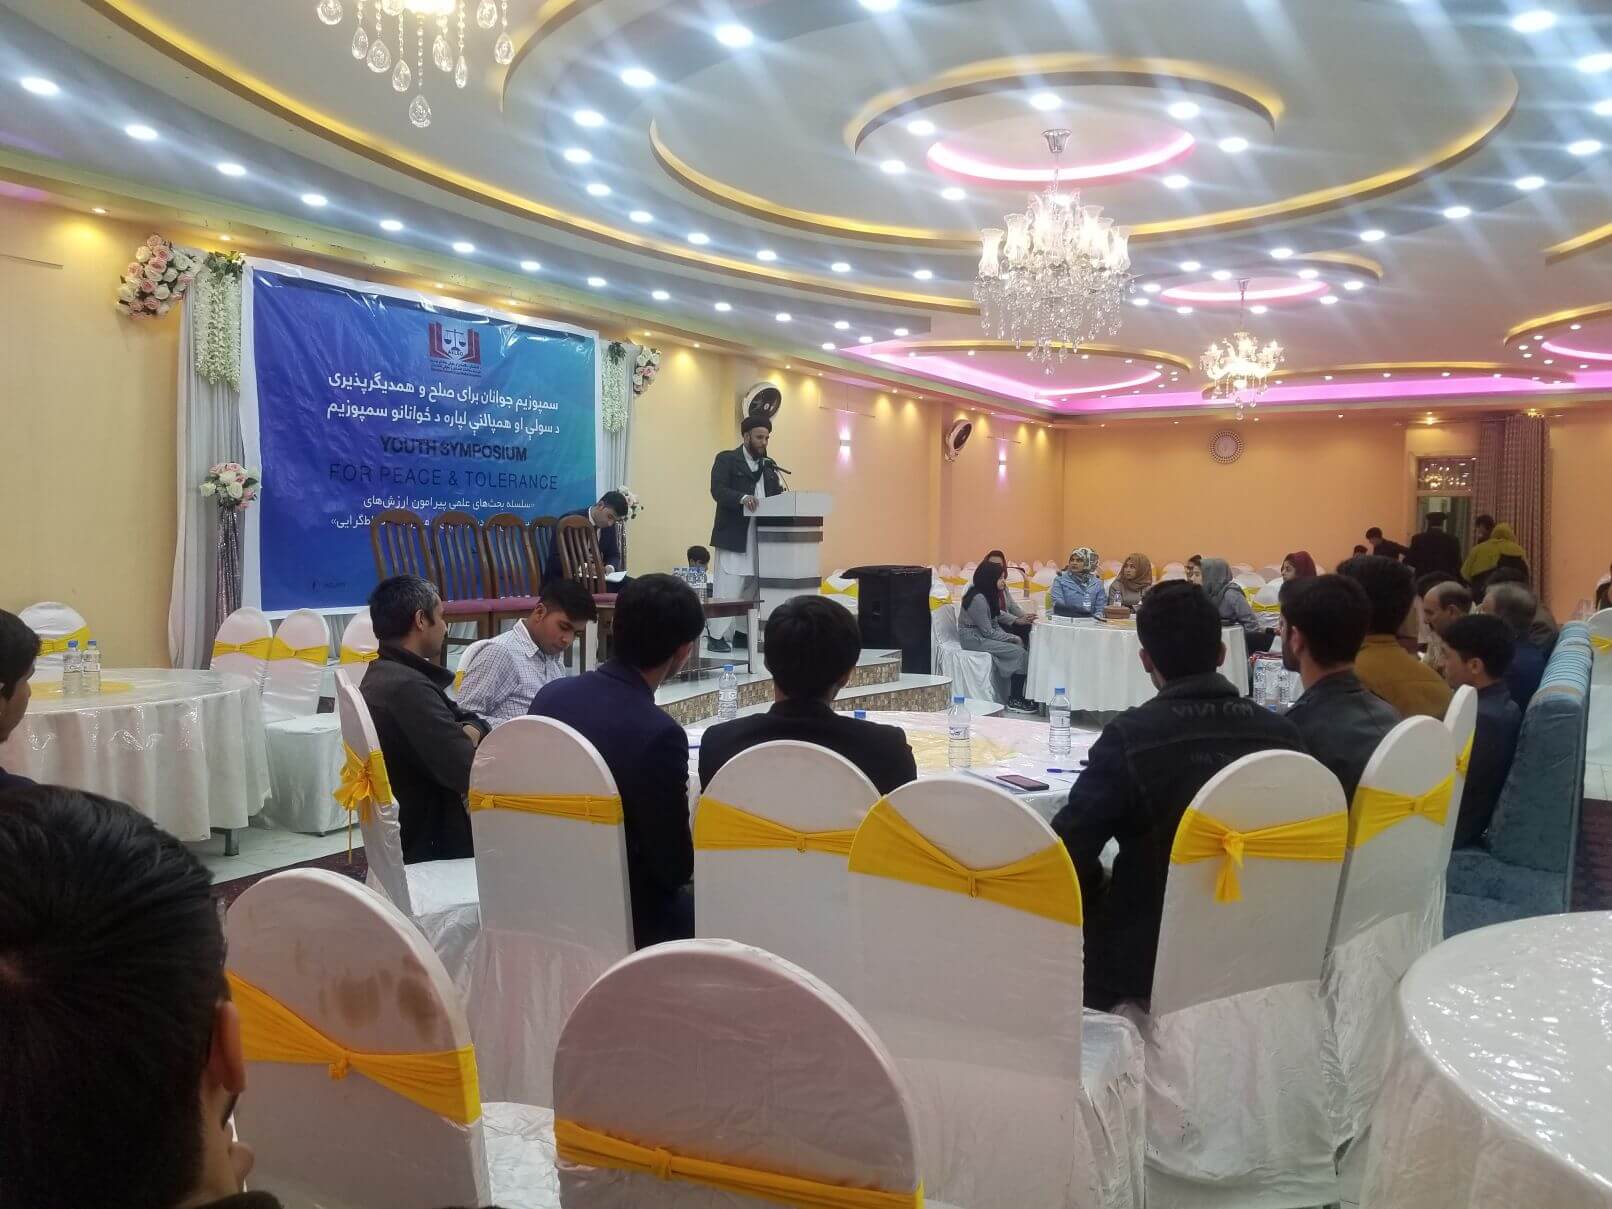 Youth Symposium for Peace & Tolerance | Balkh